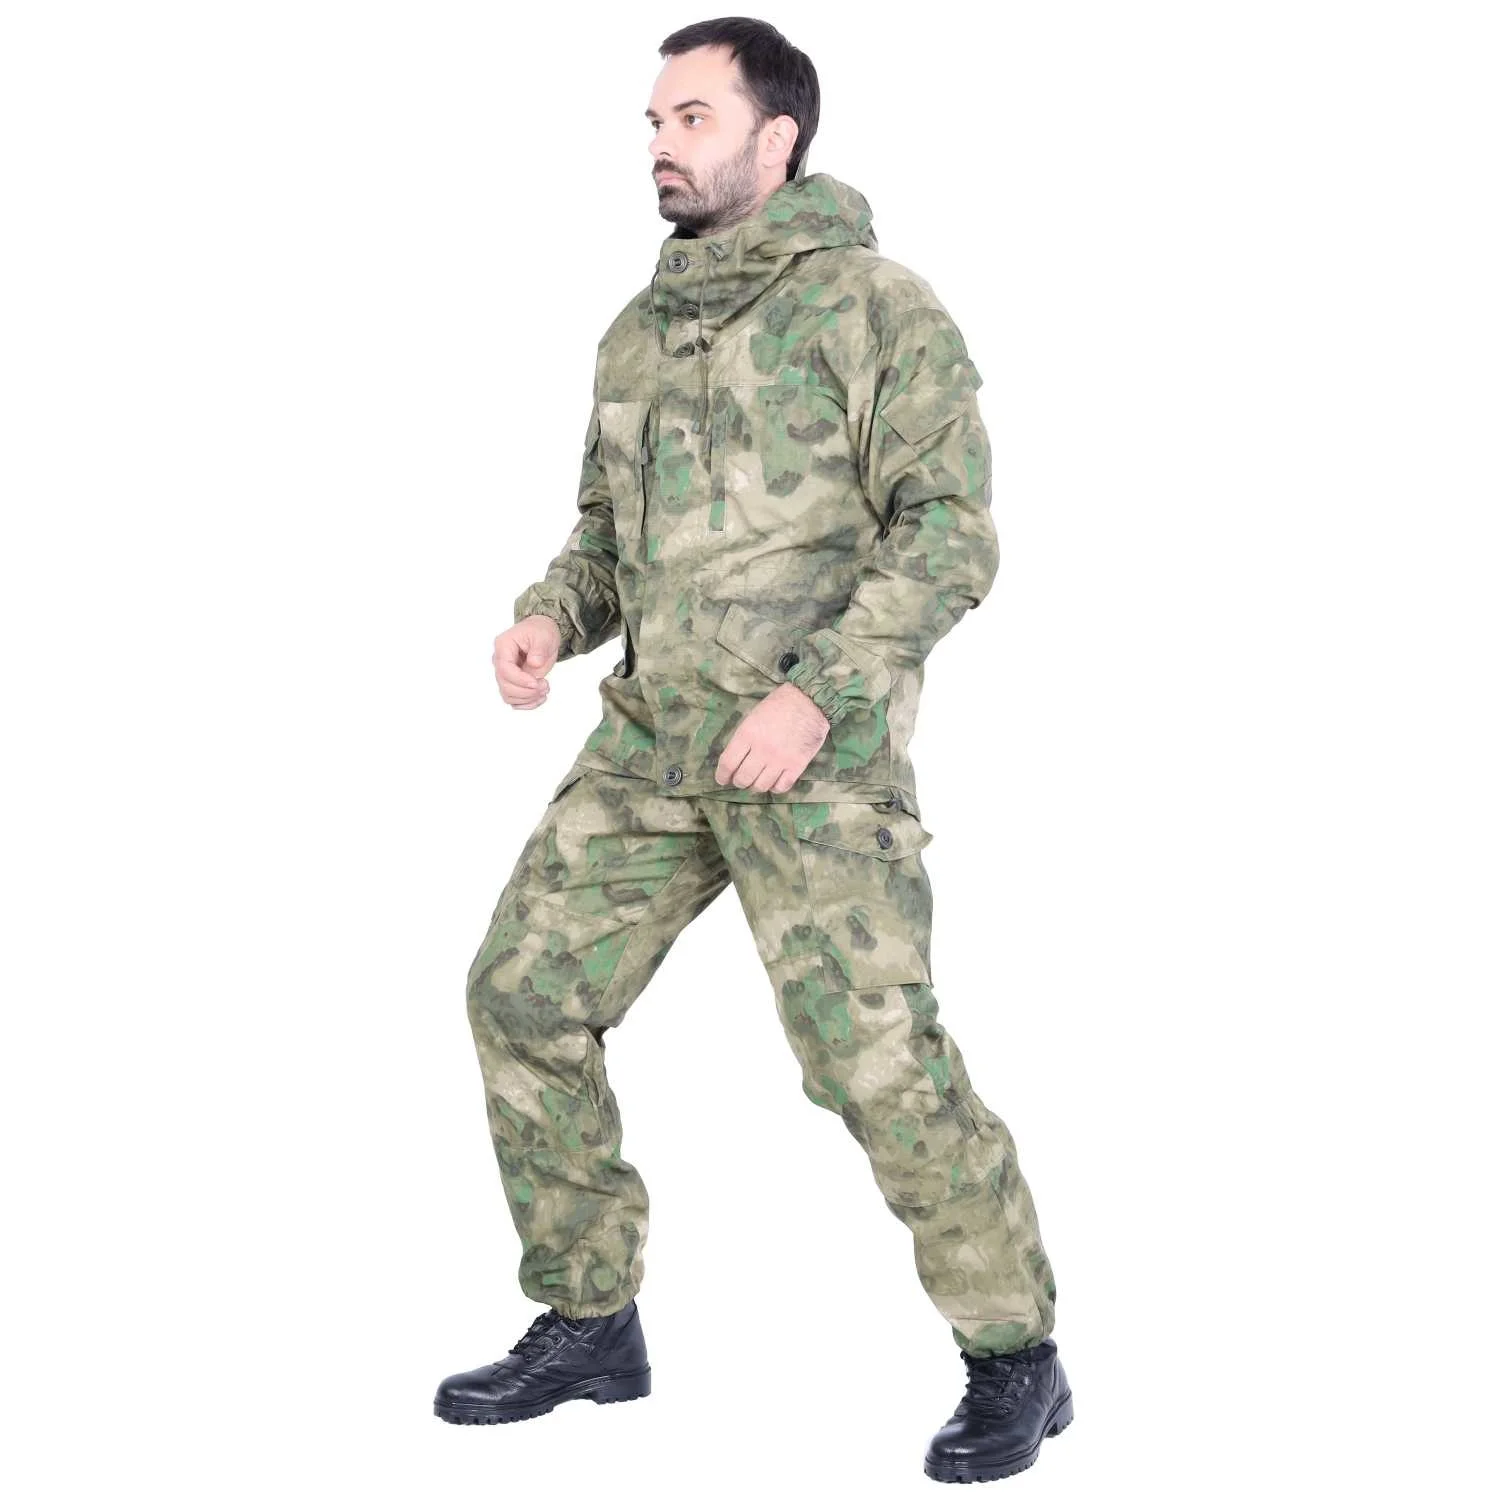 

FG Winter ATACS Wind Waterproof Ski Fleece Gorka 5 Suits Rip Stop Military Combat Uniforms Working Hunting Clothes Army Training